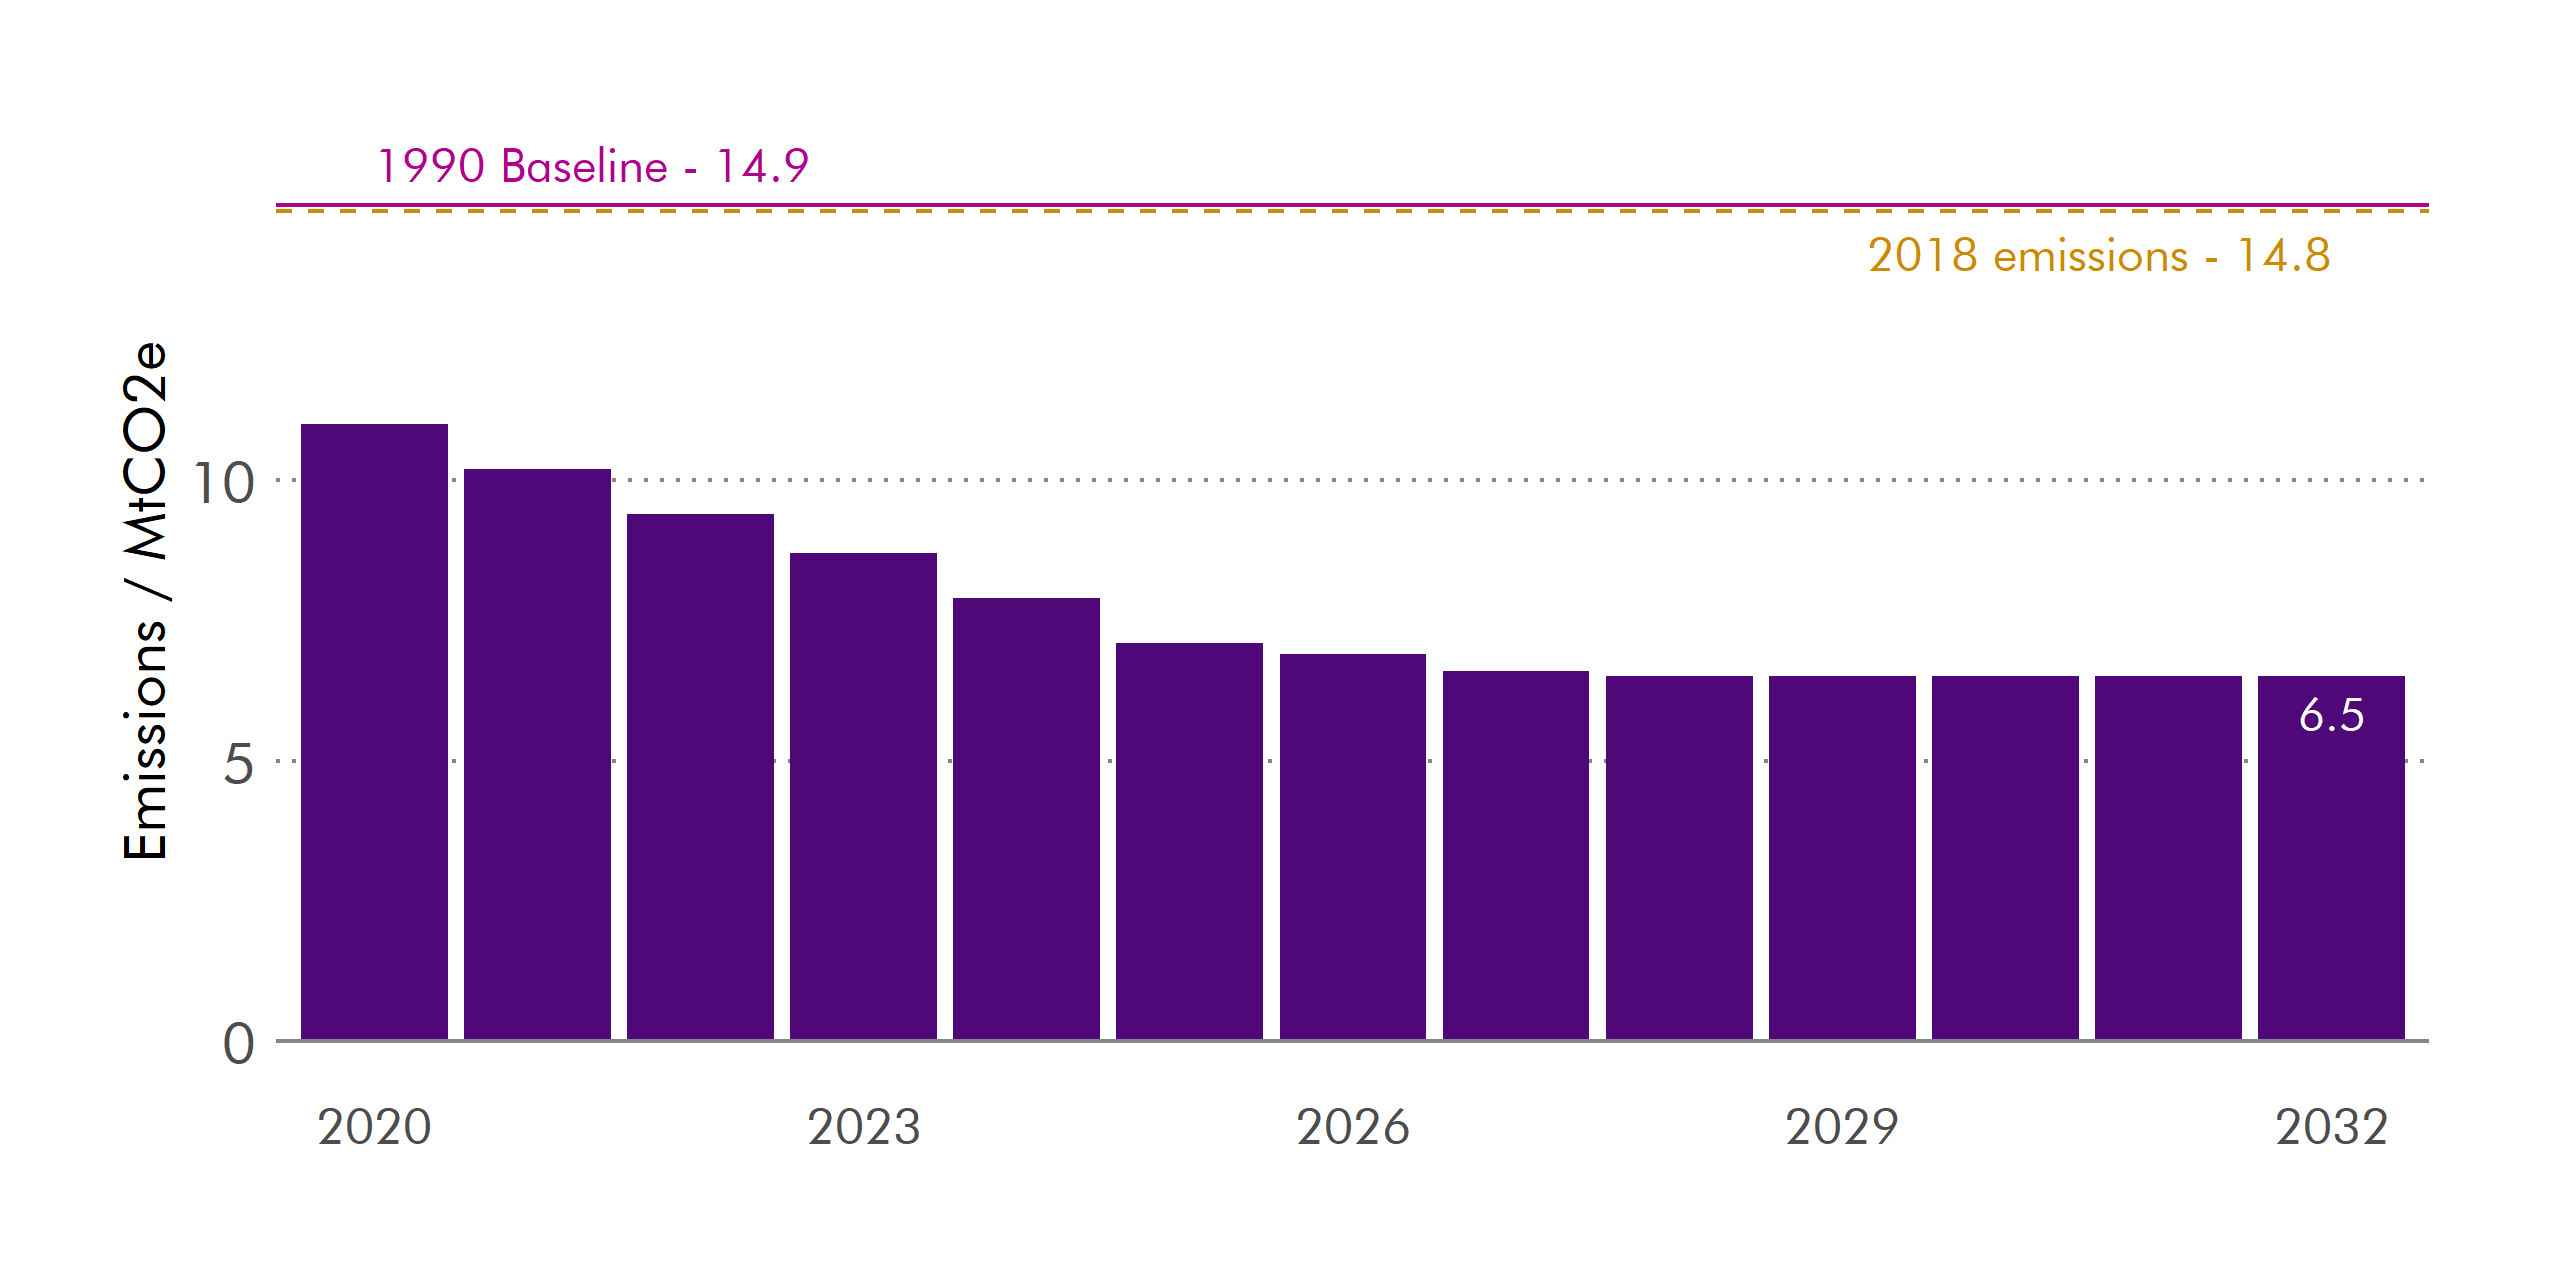 Chart showing annual transport greenhouse gas emissions targets between 2020 and 2032.